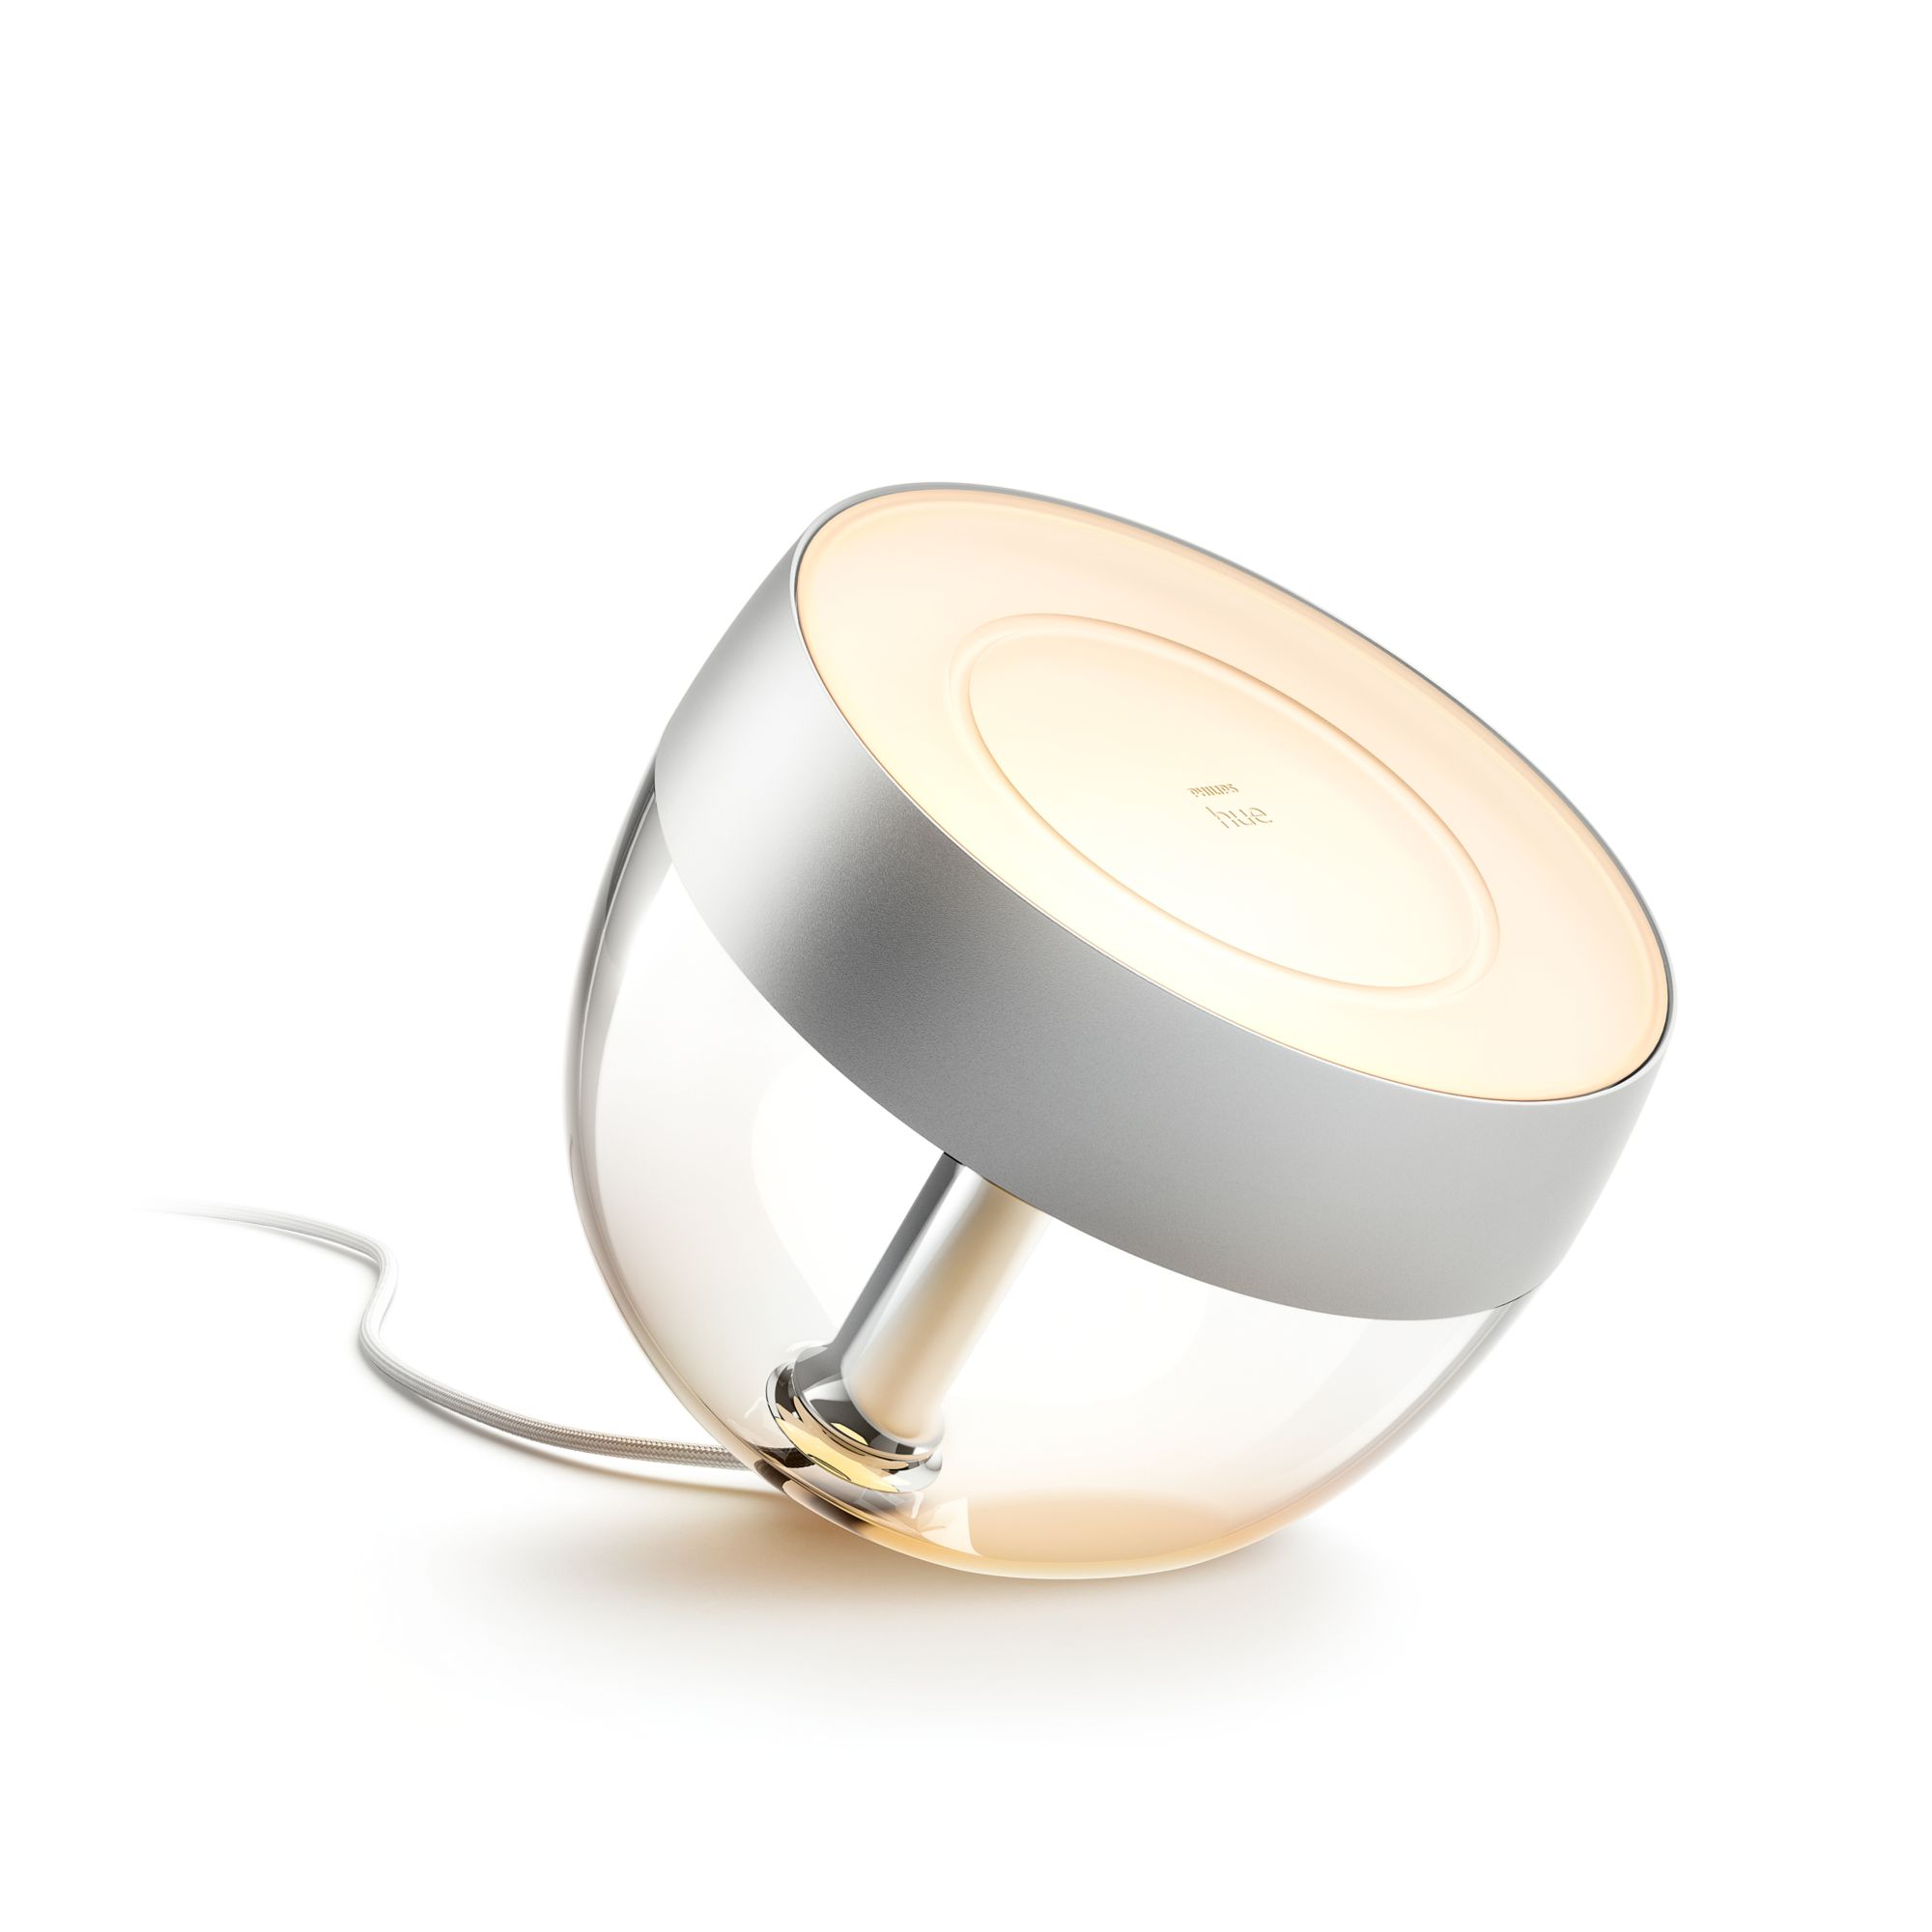 Philips by Signify Iris zilverkleur special edition